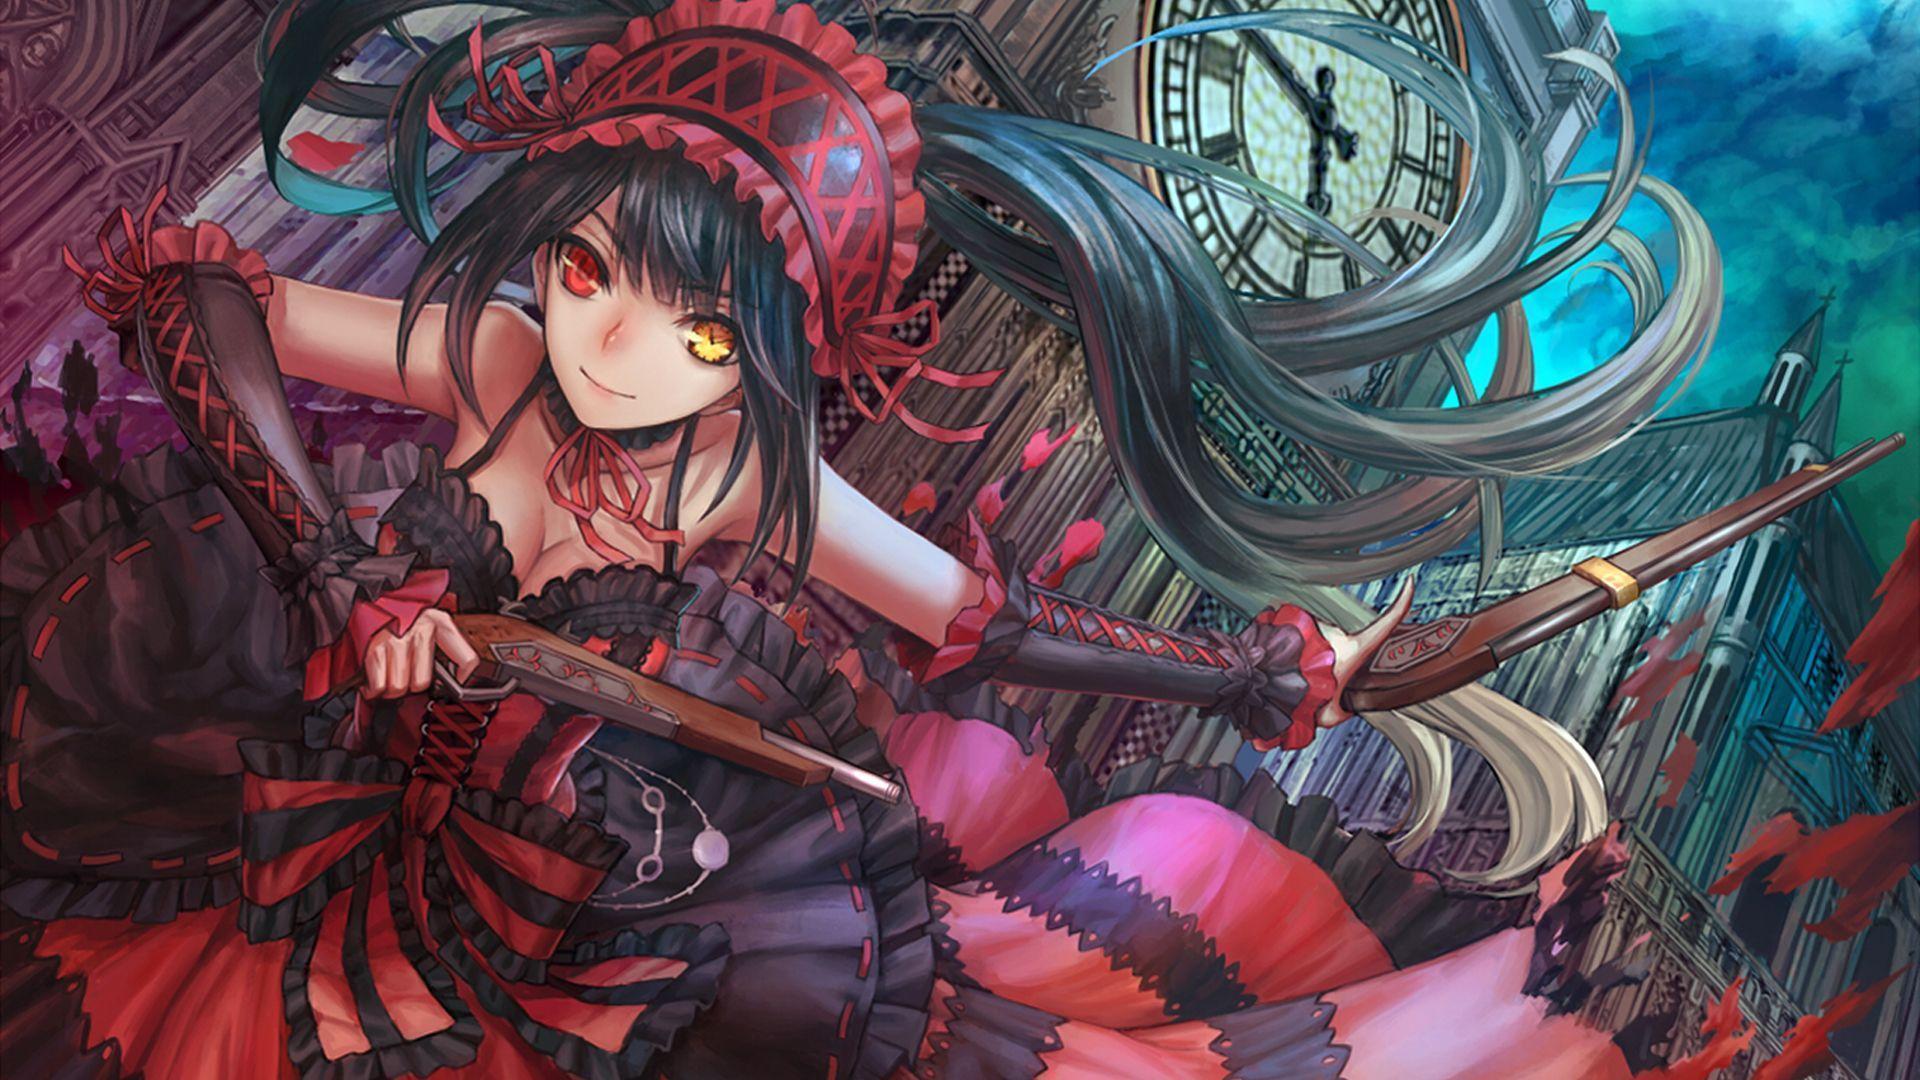 12 Date A Live Wallpapers, Date A Live Backgrounds